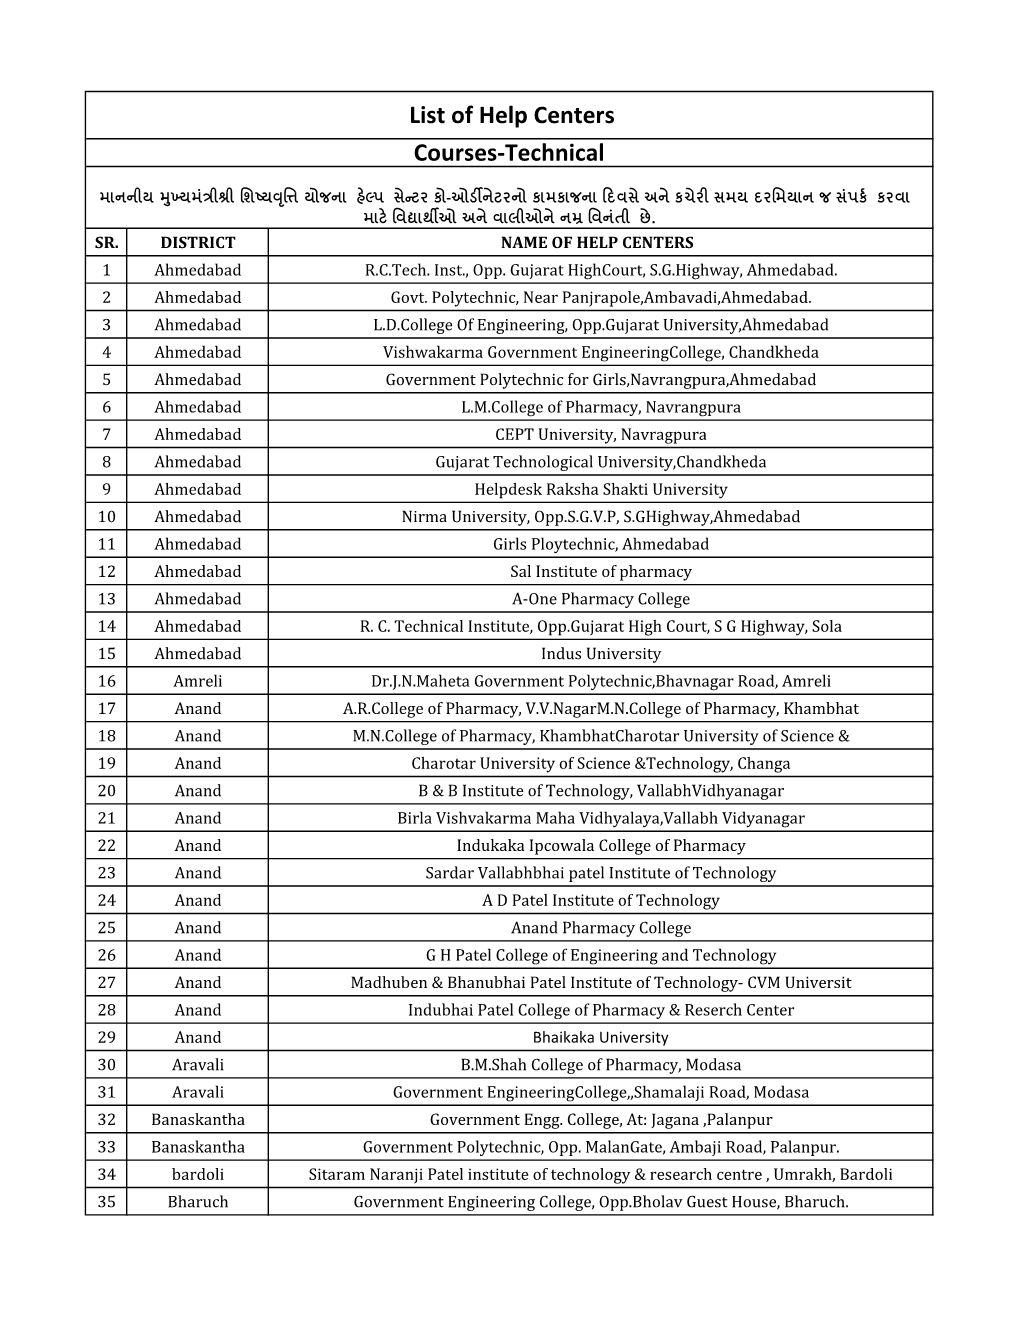 List of Help Centers for Engineering , Pharmacy and Architecture Etc